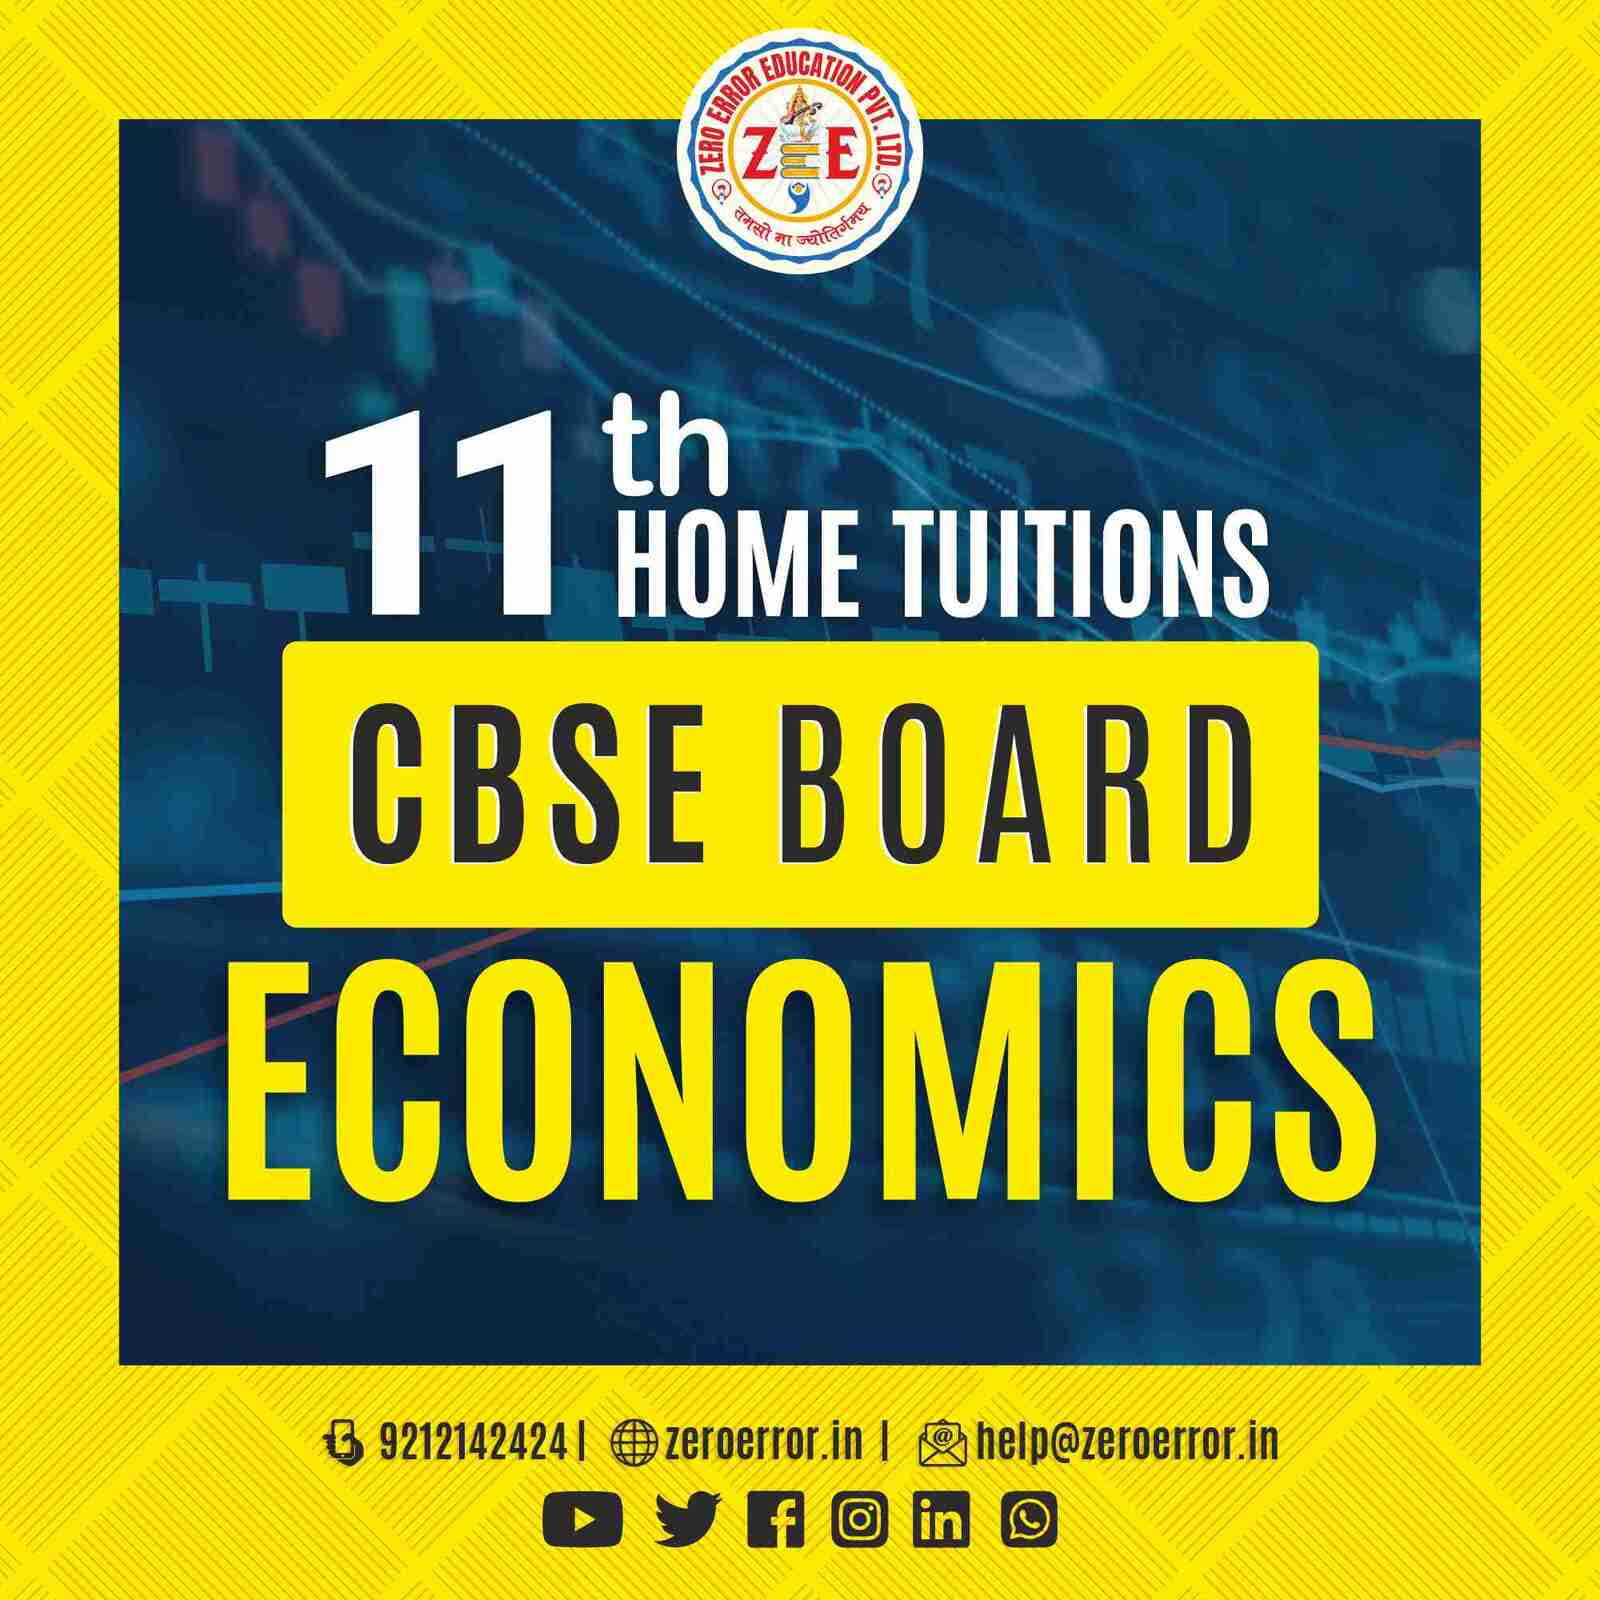 11th Grade CBSE Economics Online Classes by Zero Error Education Prepare for your CBSE board exams with online and offline Economics classes for 11th grade. Learn from experienced home tutors and get all the help you need to succeed. Enroll today at Zero Error Education. [https://zeroerror.in/] Call 9212142424 for more information.